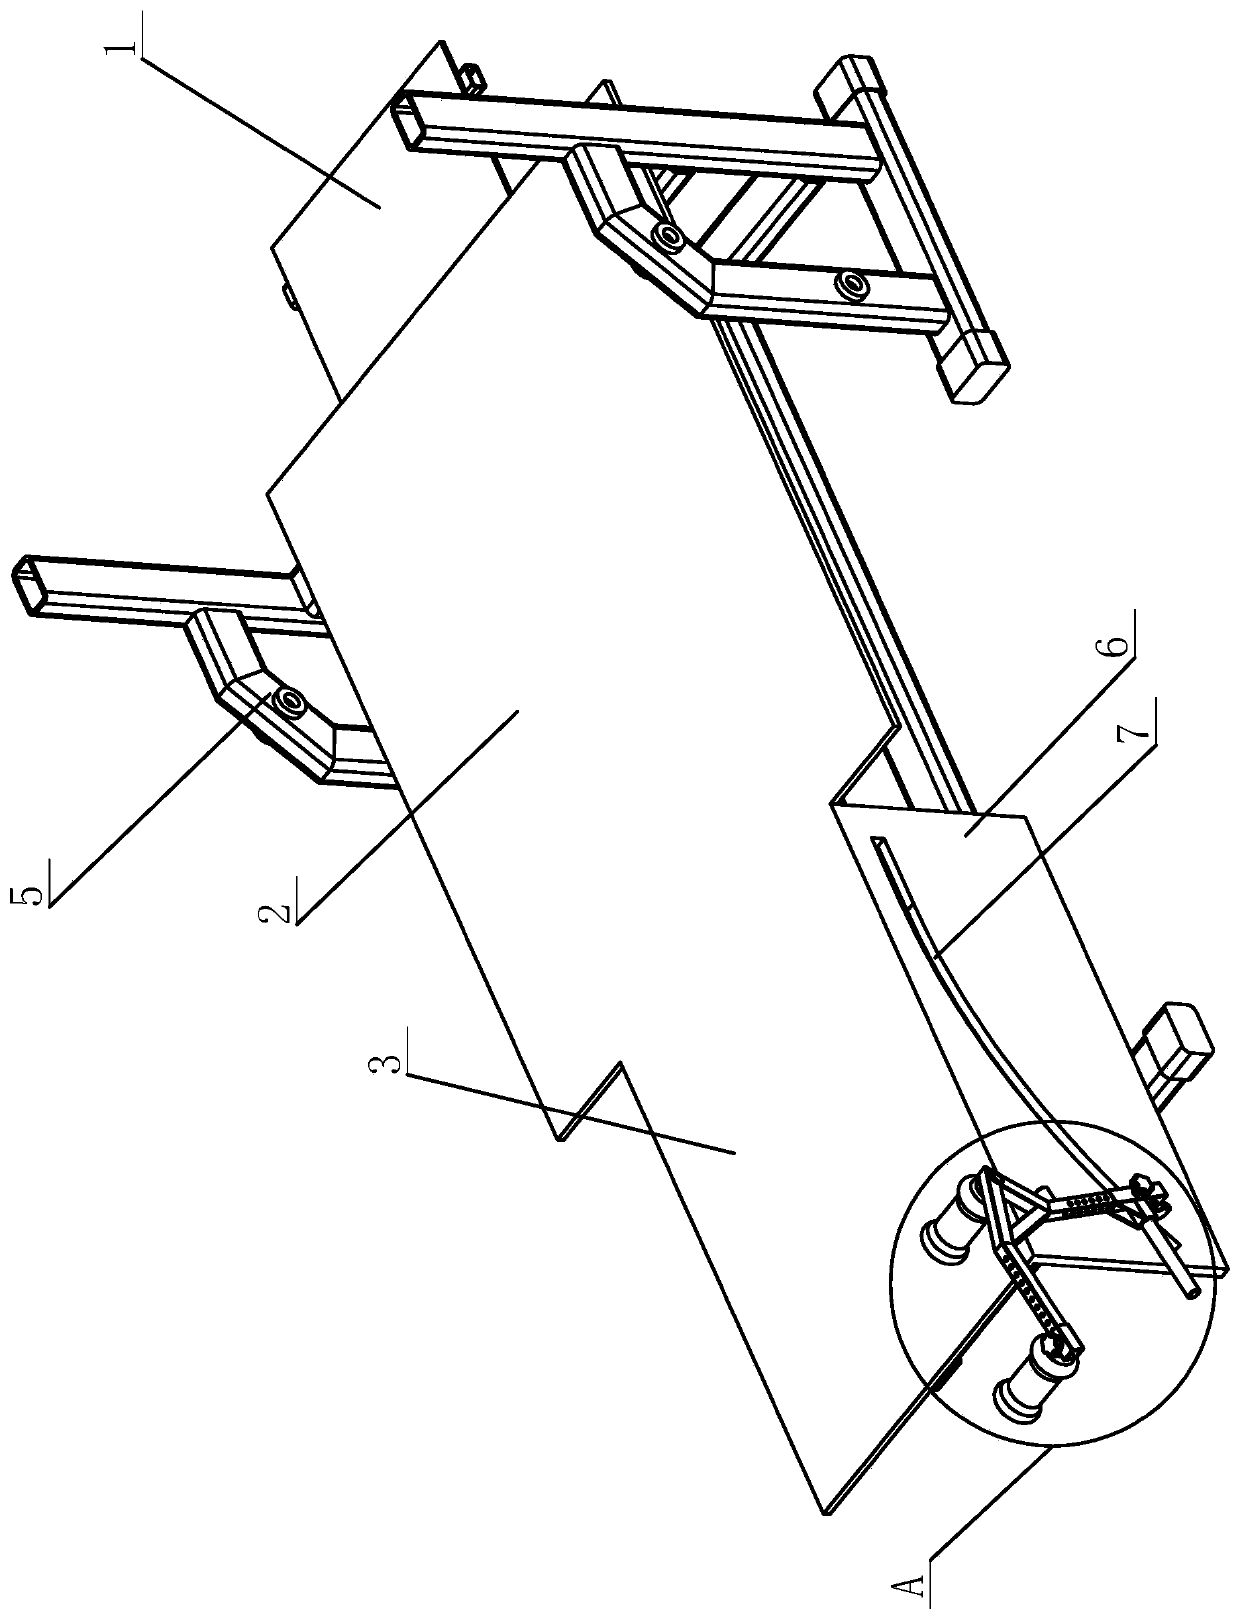 Hip joint reduction device